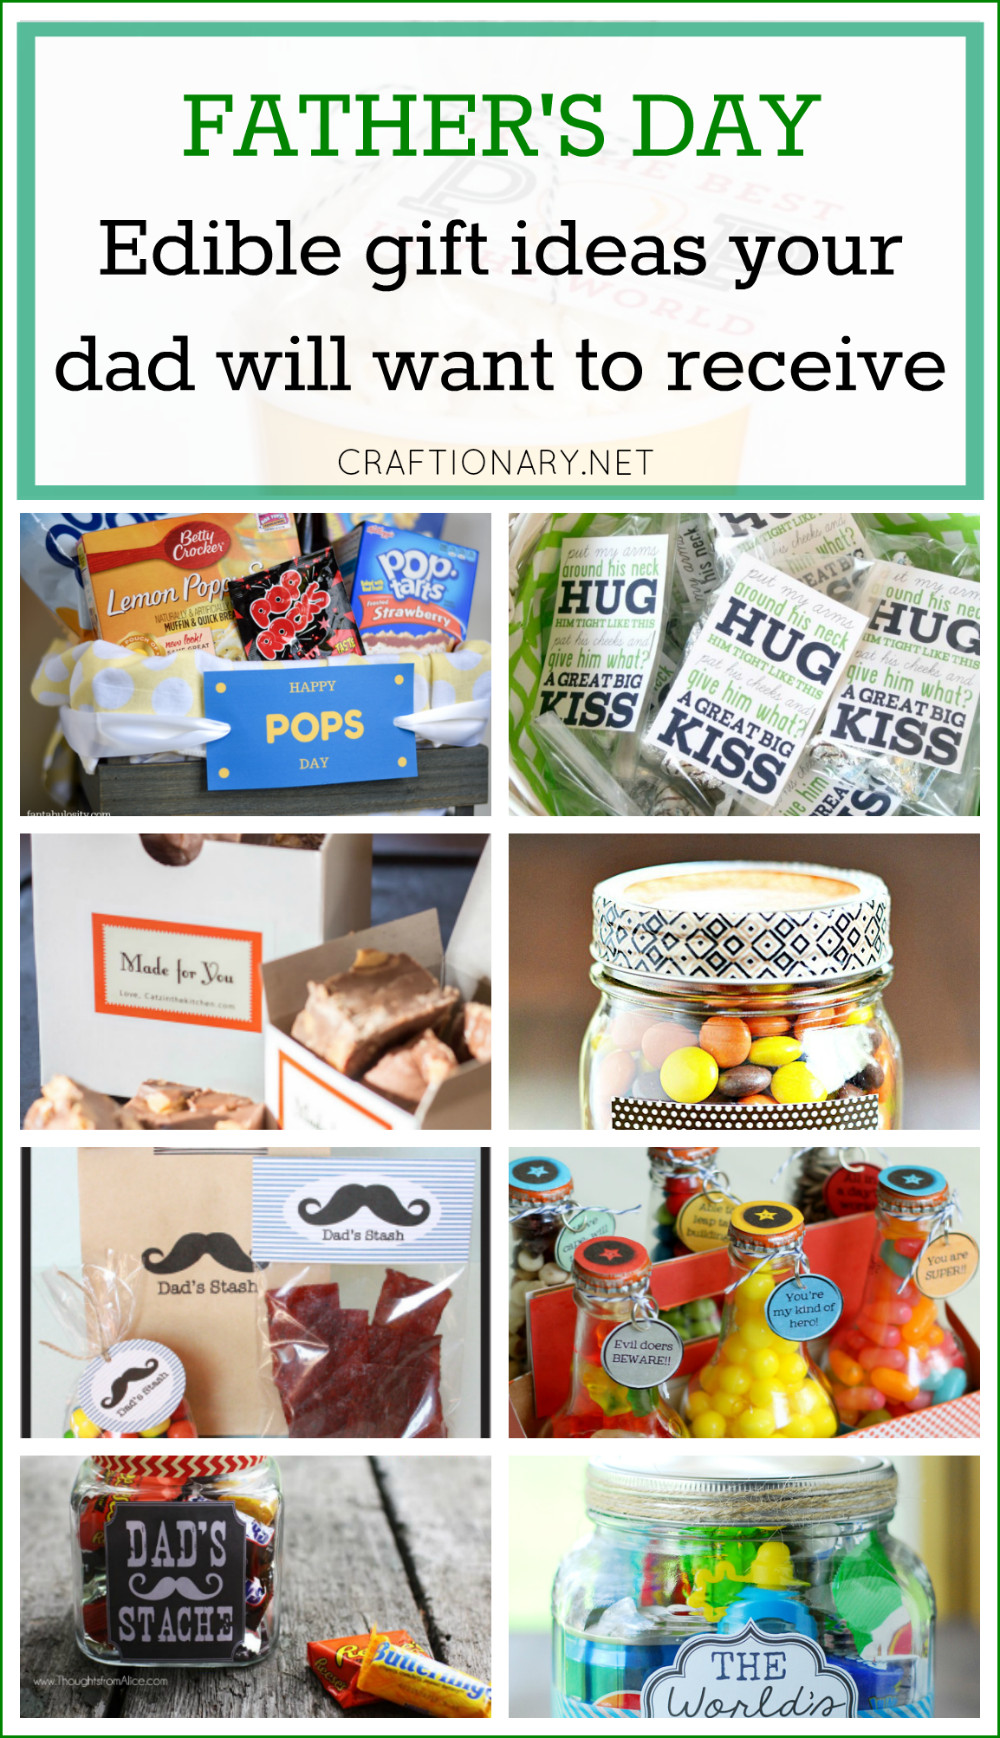 Gift Ideas For Dad On Father'S Day
 20 Edible Gift Ideas for Father s Day that your dad will